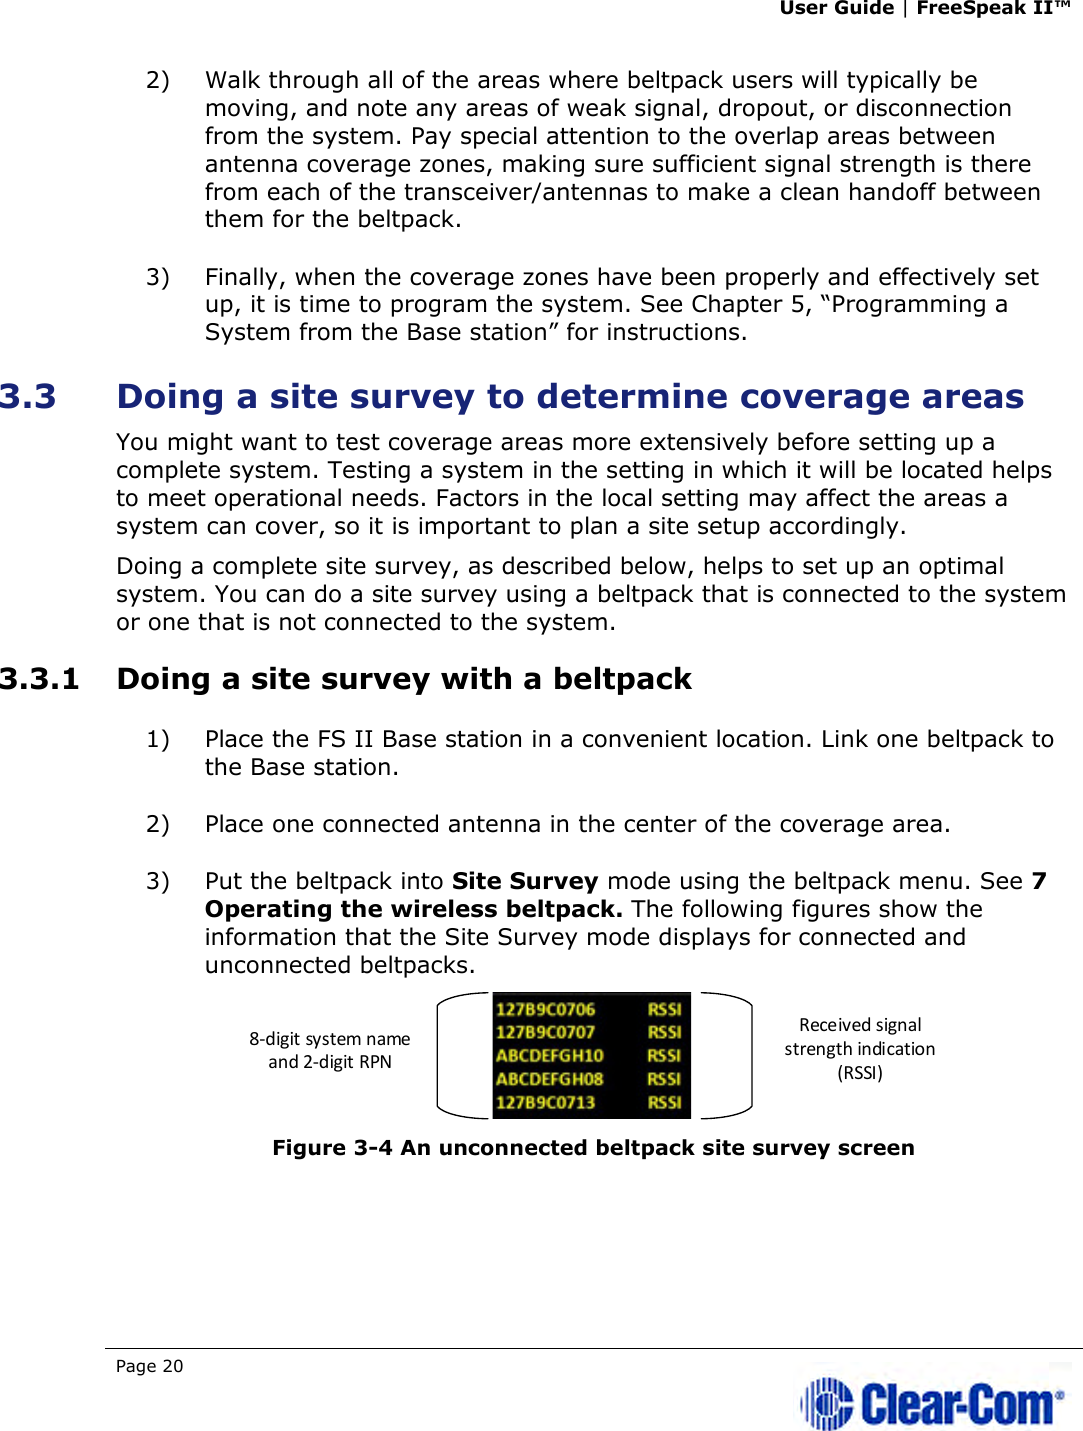 User Guide | FreeSpeak II™  Page 20   2) Walk through all of the areas where beltpack users will typically be moving, and note any areas of weak signal, dropout, or disconnection from the system. Pay special attention to the overlap areas between antenna coverage zones, making sure sufficient signal strength is there from each of the transceiver/antennas to make a clean handoff between them for the beltpack.  3) Finally, when the coverage zones have been properly and effectively set up, it is time to program the system. See Chapter 5, “Programming a System from the Base station” for instructions. 3.3 Doing a site survey to determine coverage areas  You might want to test coverage areas more extensively before setting up a complete system. Testing a system in the setting in which it will be located helps to meet operational needs. Factors in the local setting may affect the areas a system can cover, so it is important to plan a site setup accordingly. Doing a complete site survey, as described below, helps to set up an optimal system. You can do a site survey using a beltpack that is connected to the system or one that is not connected to the system. 3.3.1 Doing a site survey with a beltpack 1) Place the FS II Base station in a convenient location. Link one beltpack to the Base station.  2) Place one connected antenna in the center of the coverage area.  3) Put the beltpack into Site Survey mode using the beltpack menu. See 7 Operating the wireless beltpack. The following figures show the information that the Site Survey mode displays for connected and unconnected beltpacks.  Figure 3-4 An unconnected beltpack site survey screen  Received signal strength indication (RSSI)8-digit system name and 2-digit RPN